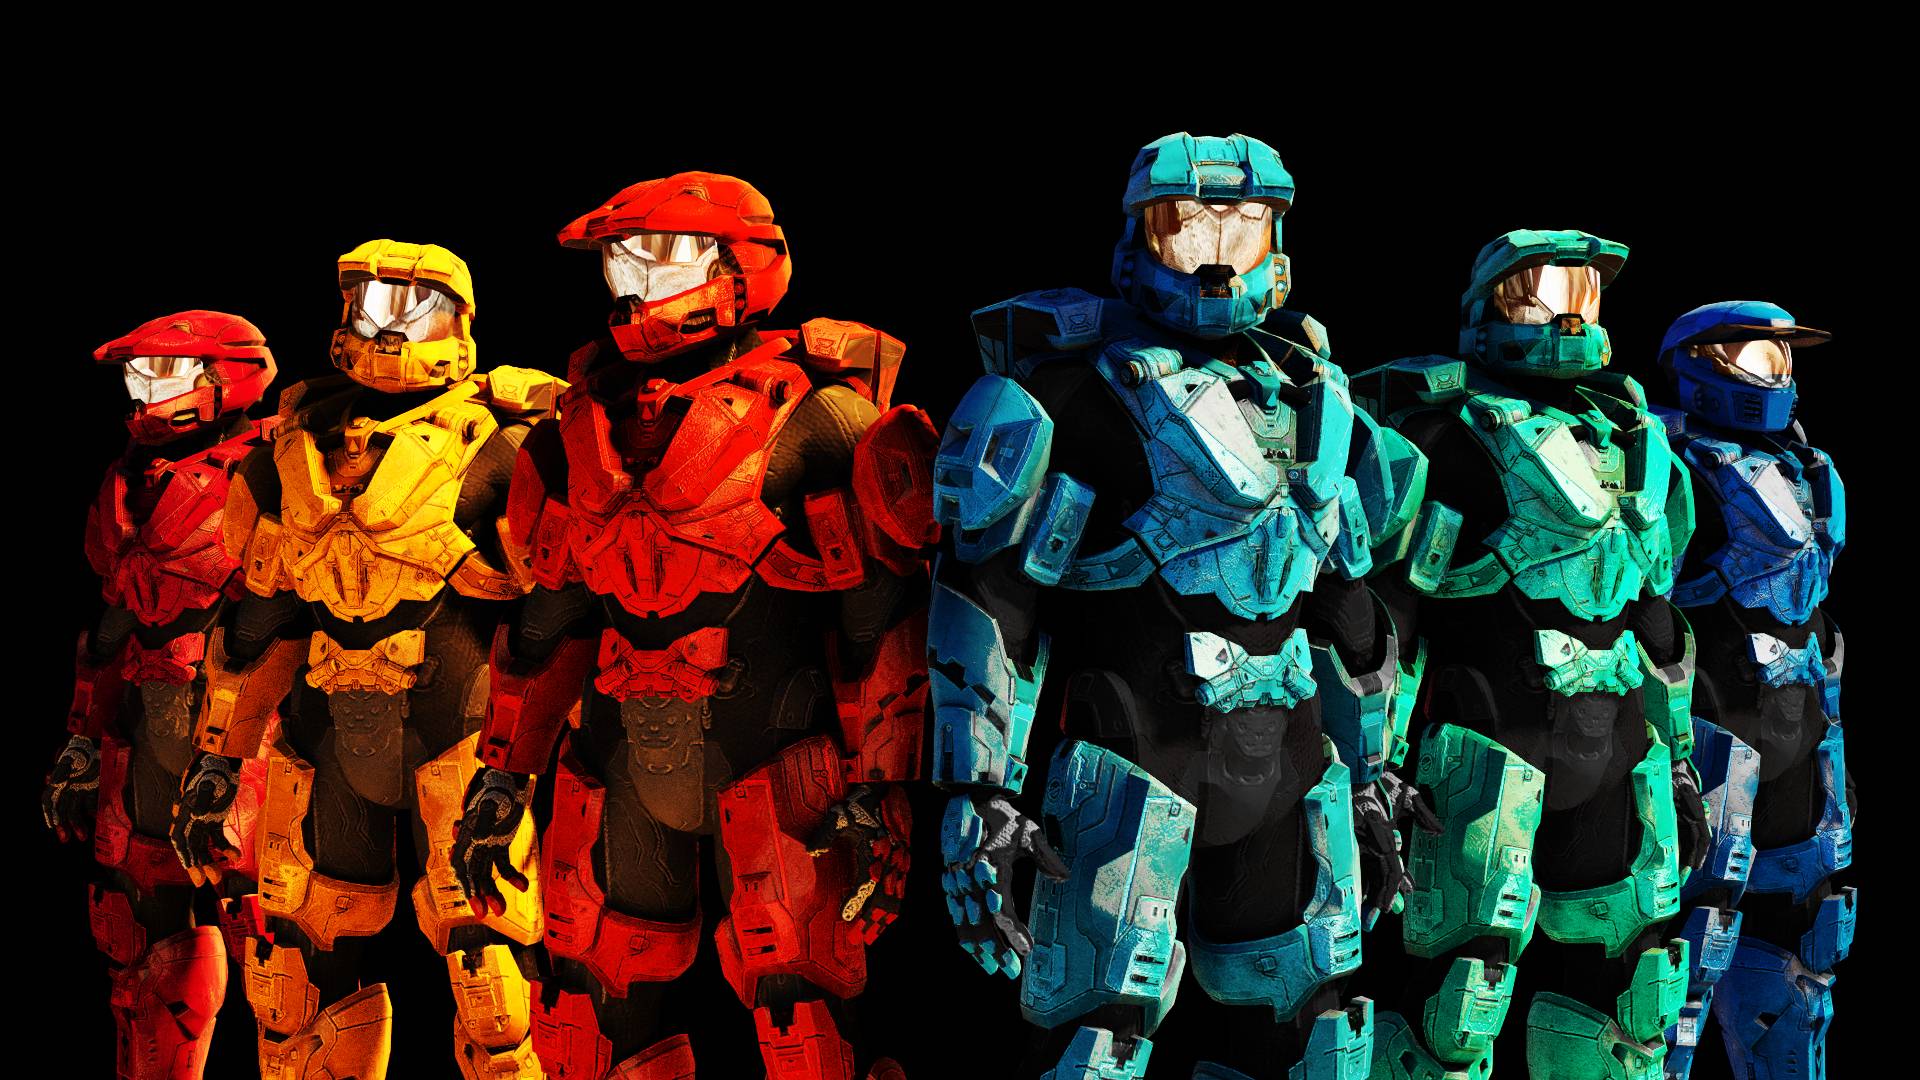 Red Vs Blue Wallpapers